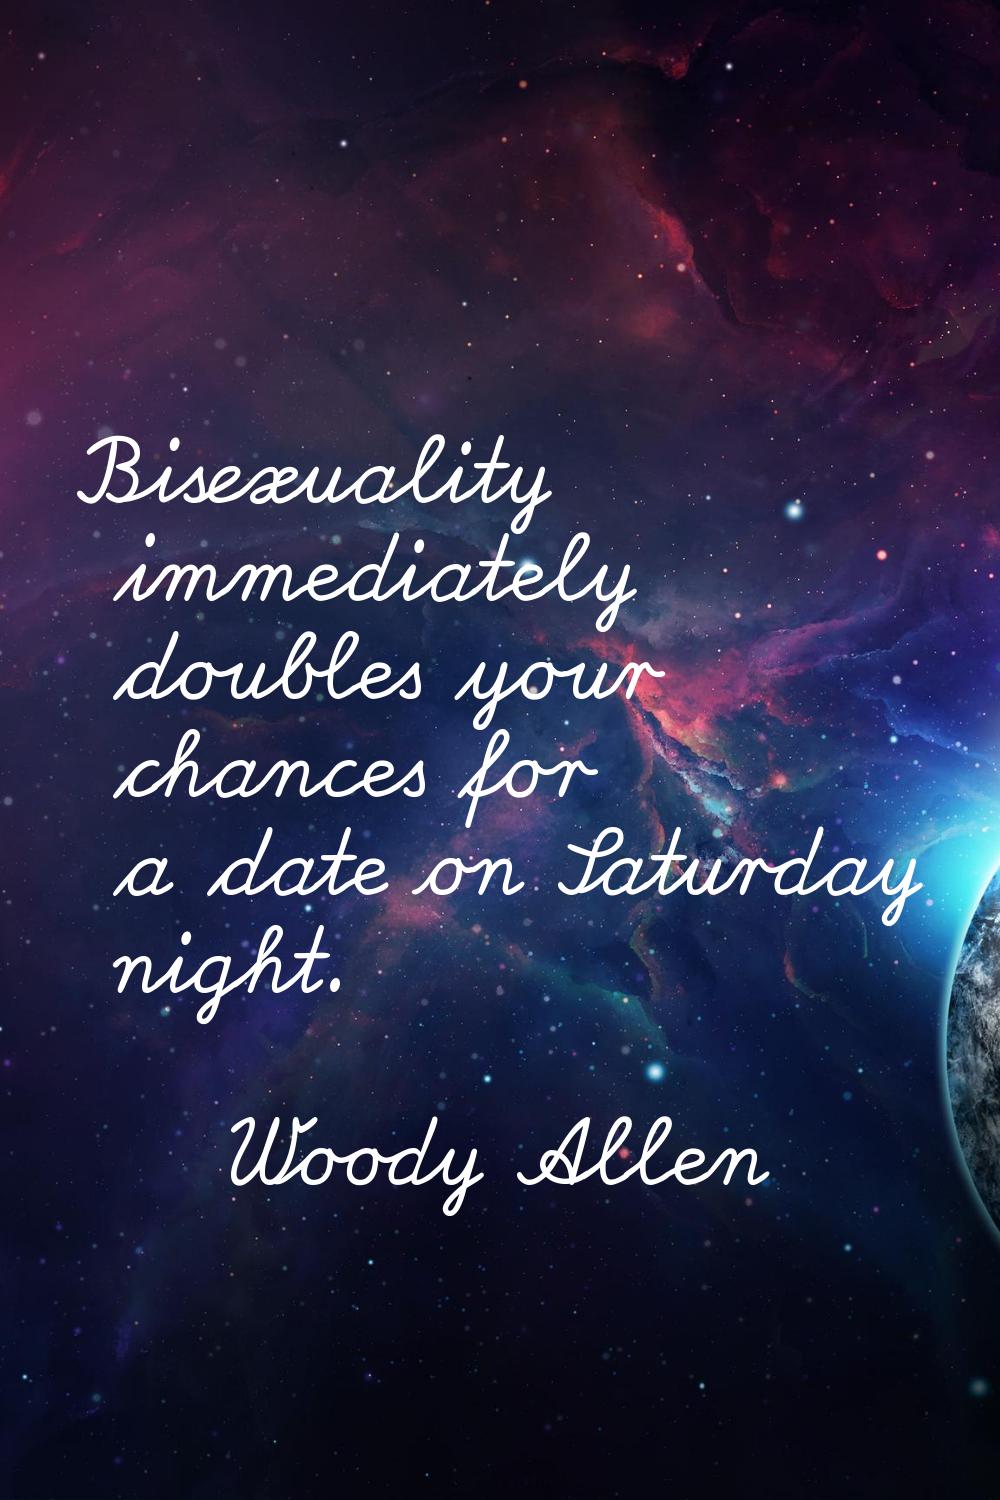 Bisexuality immediately doubles your chances for a date on Saturday night.